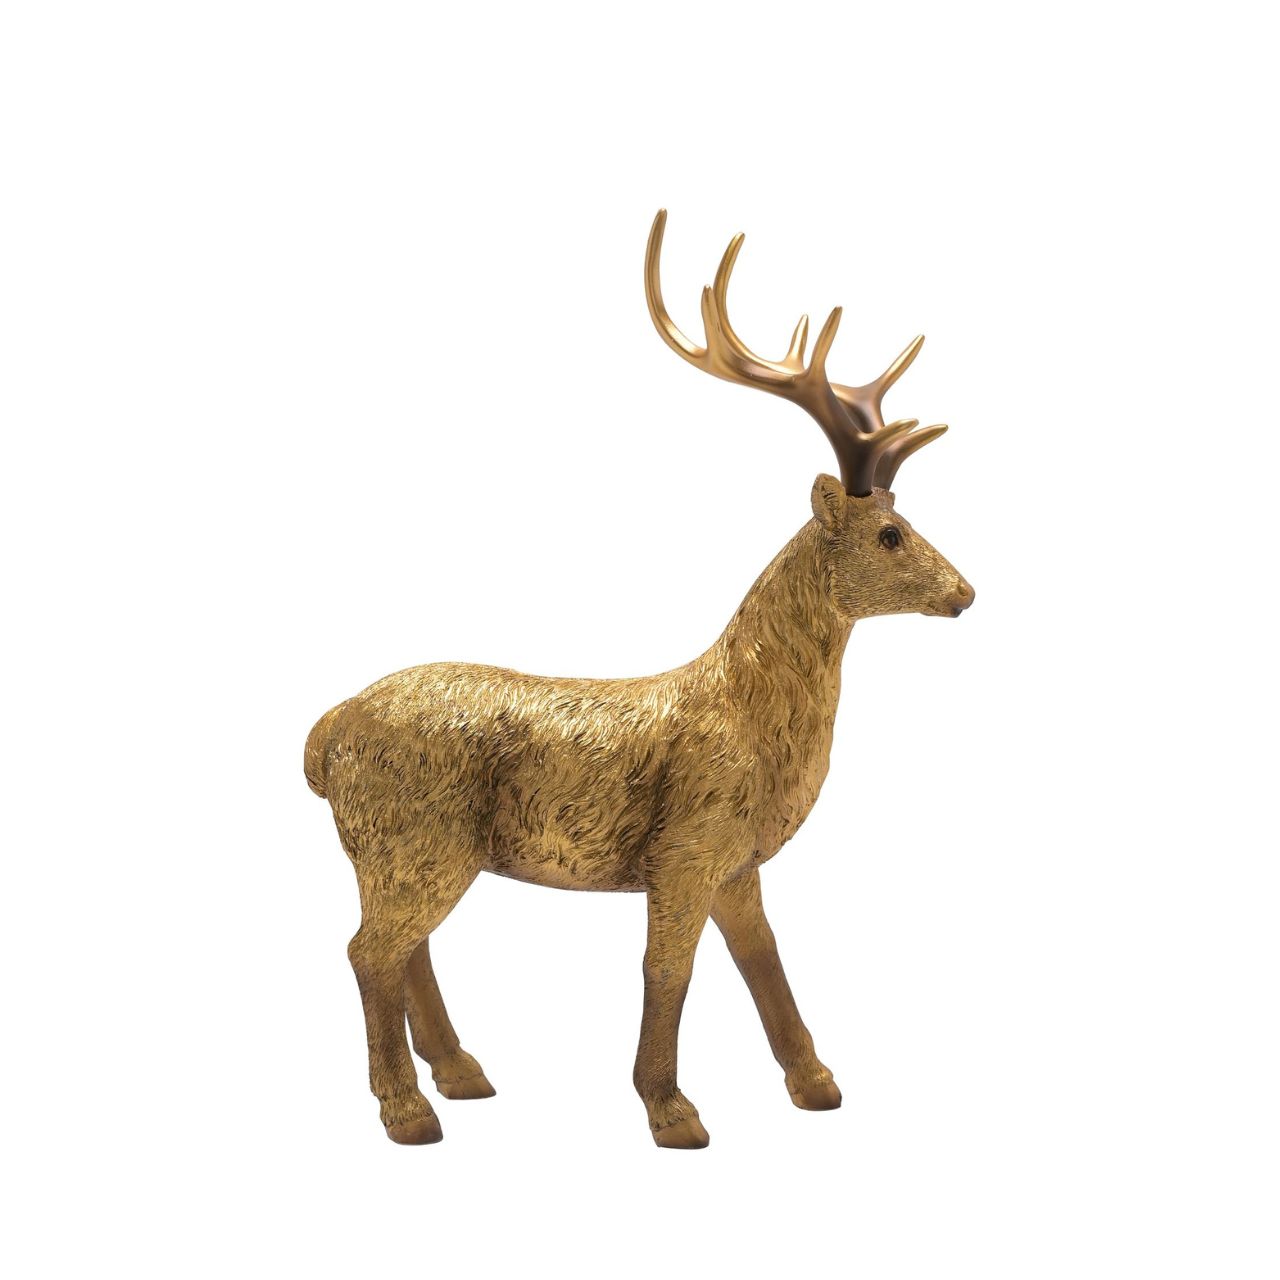 Christmas Standing Gold Stag  A standing gold stag by THE SEASONAL GIFT CO.  This eye-catching Christmas decoration commands attention when displayed at home over the festive period.